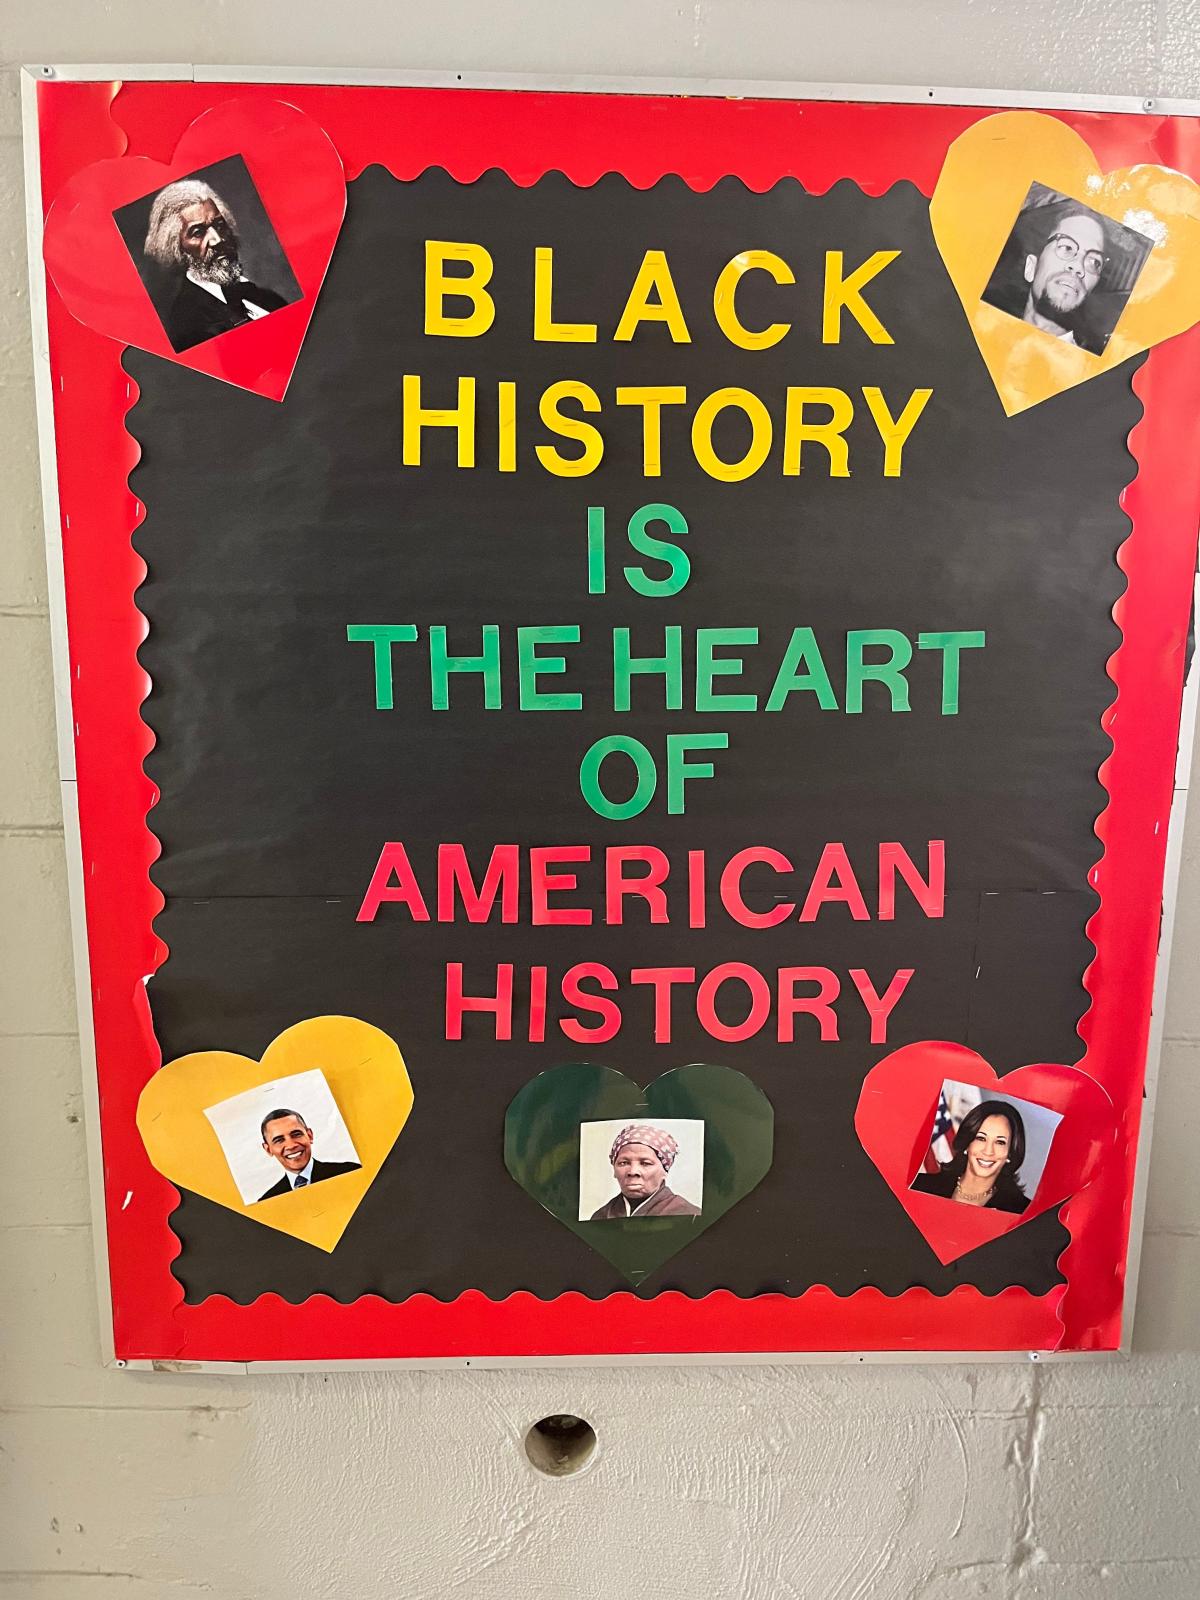 Leon County students, teachers grapple with teaching Black history